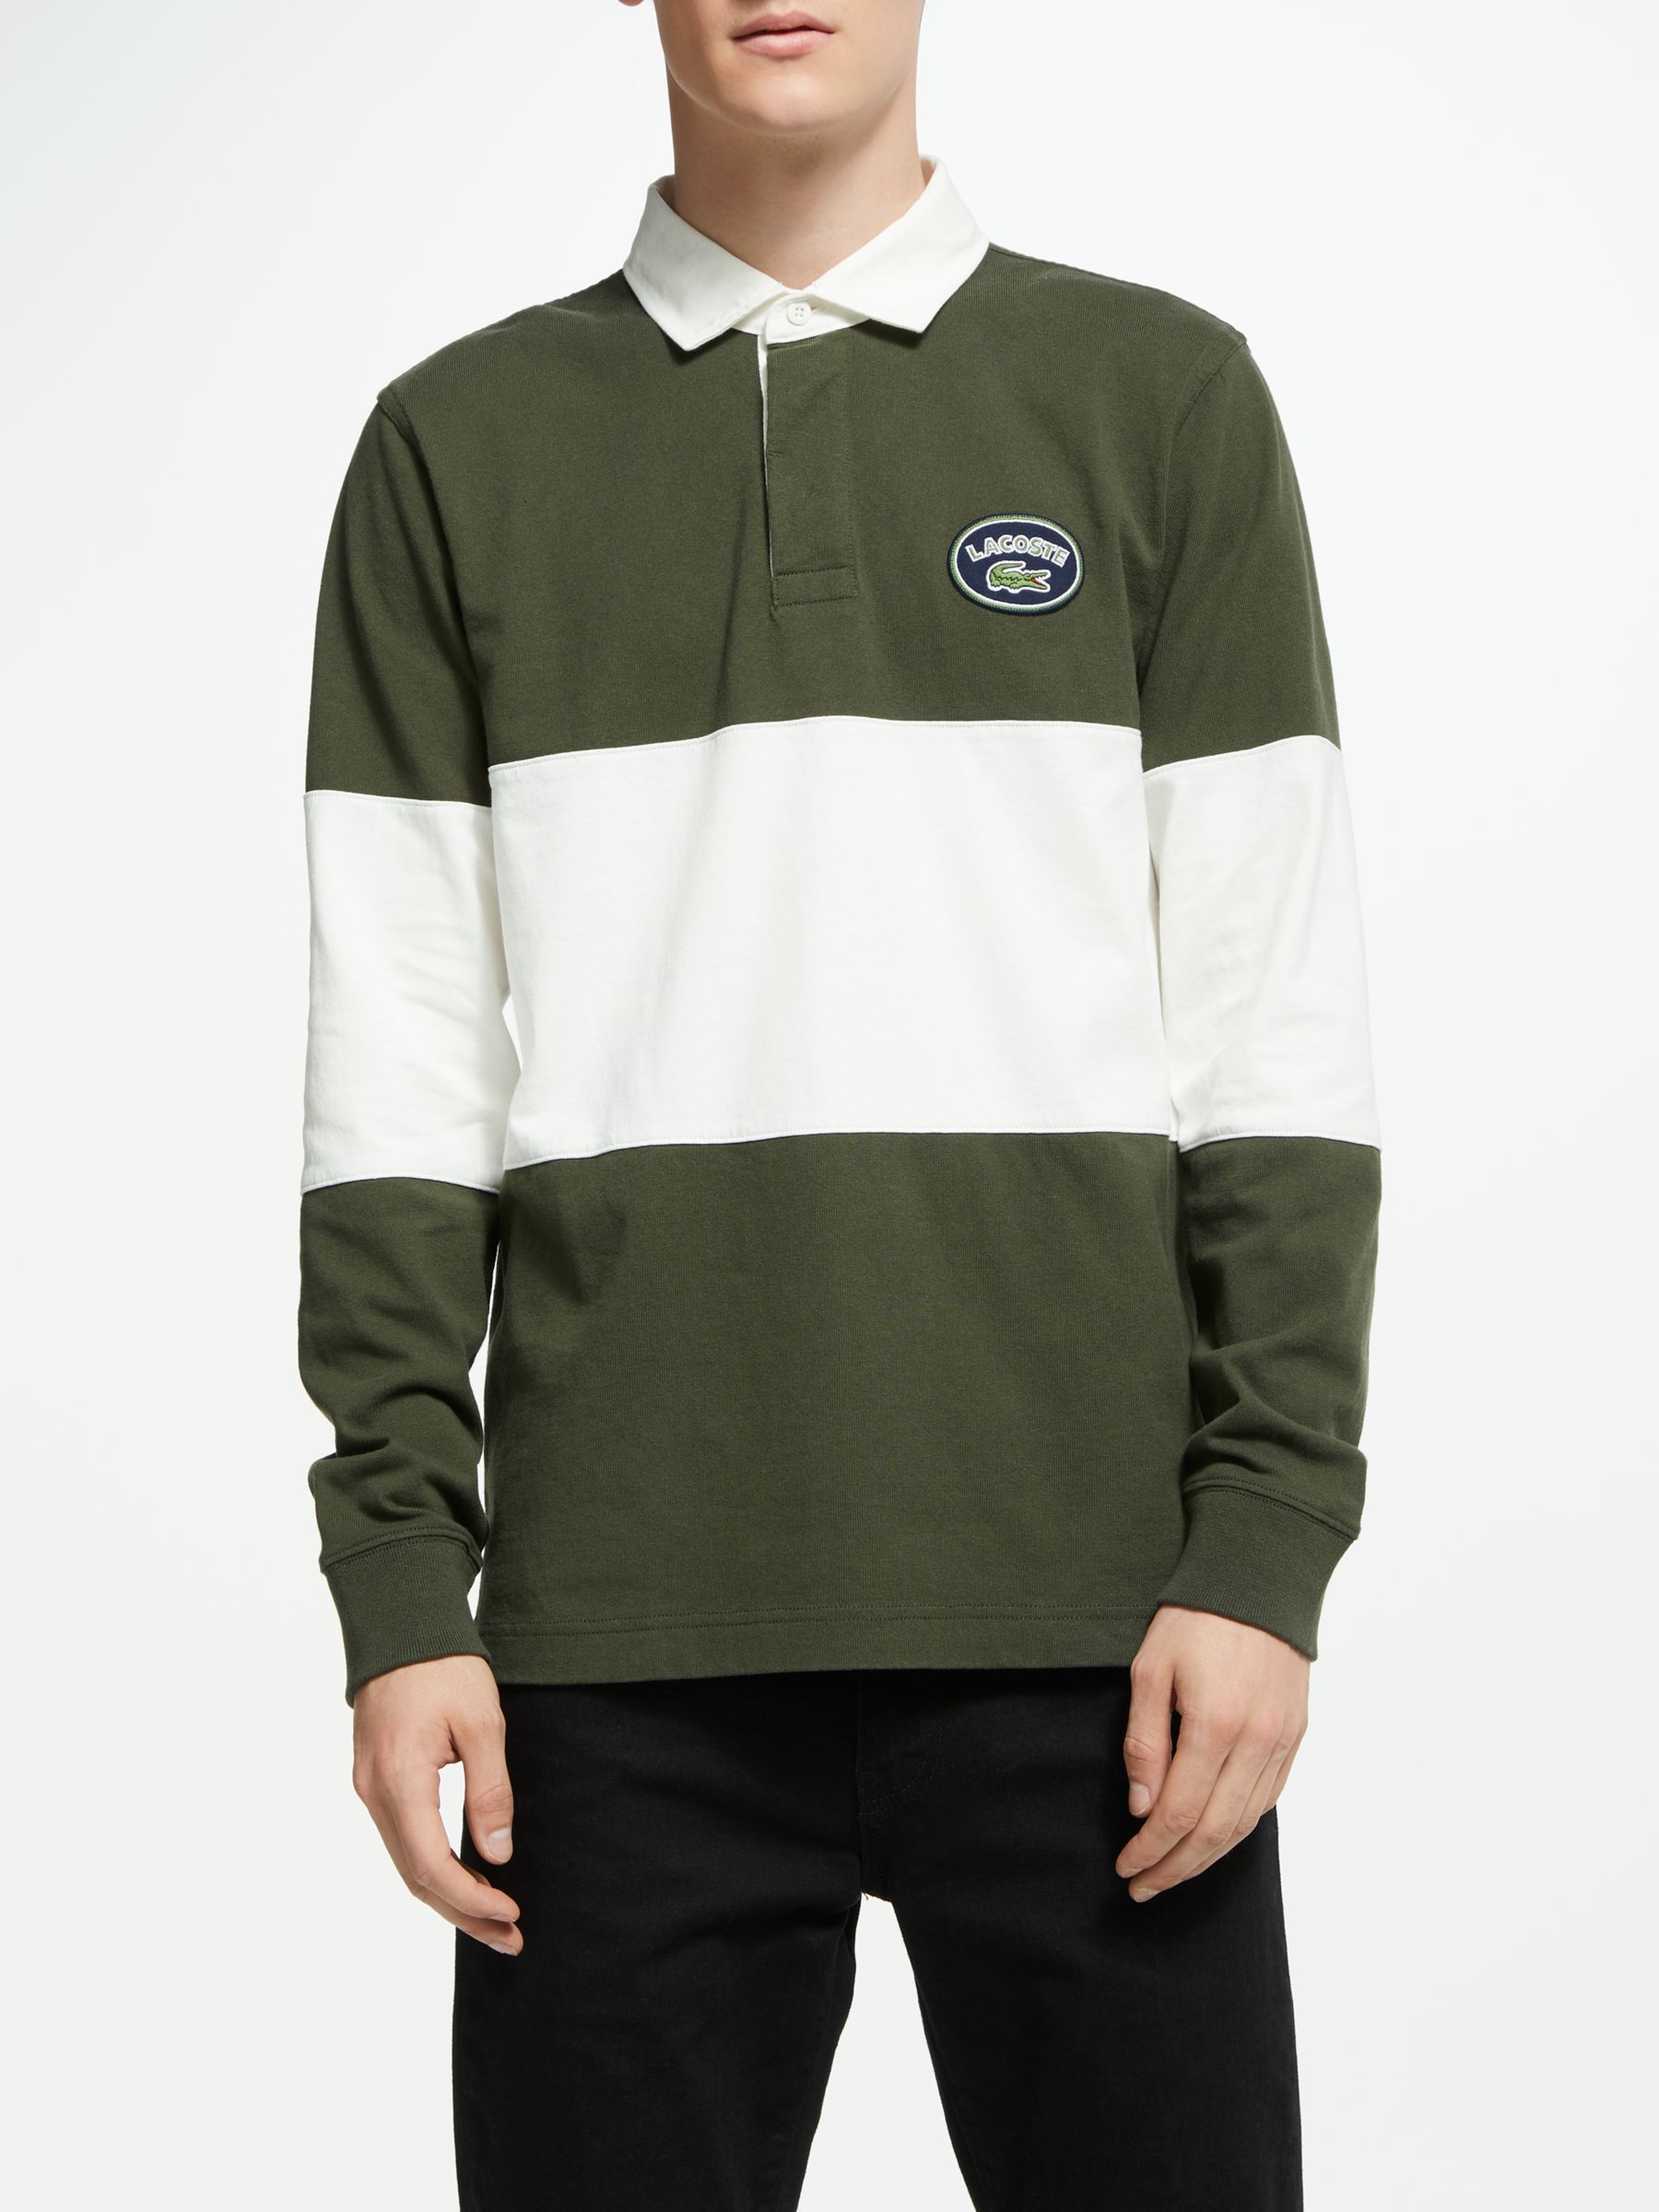 rugby shirt lacoste